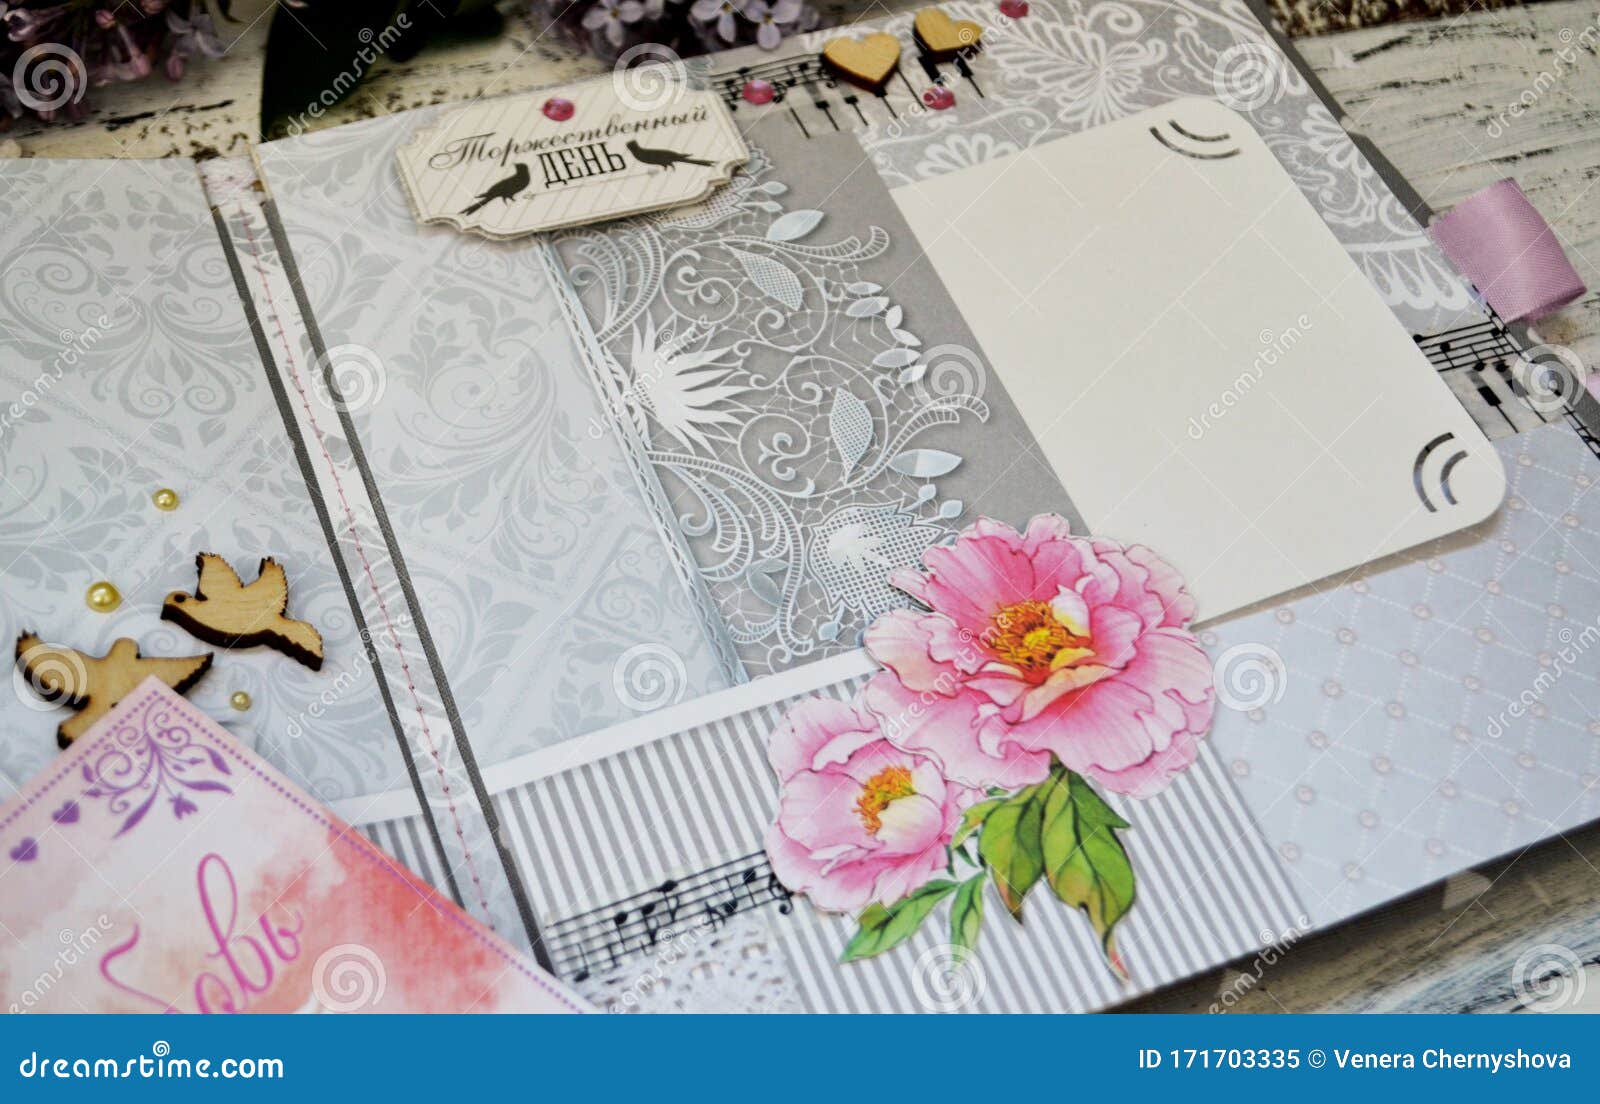 Scrapbooking Handmade Photo Album Diy Top View On Table With Elements For Scrapbooking Cut Paper Die Cuts Paper Flowers Stock Image Image Of Media Decor